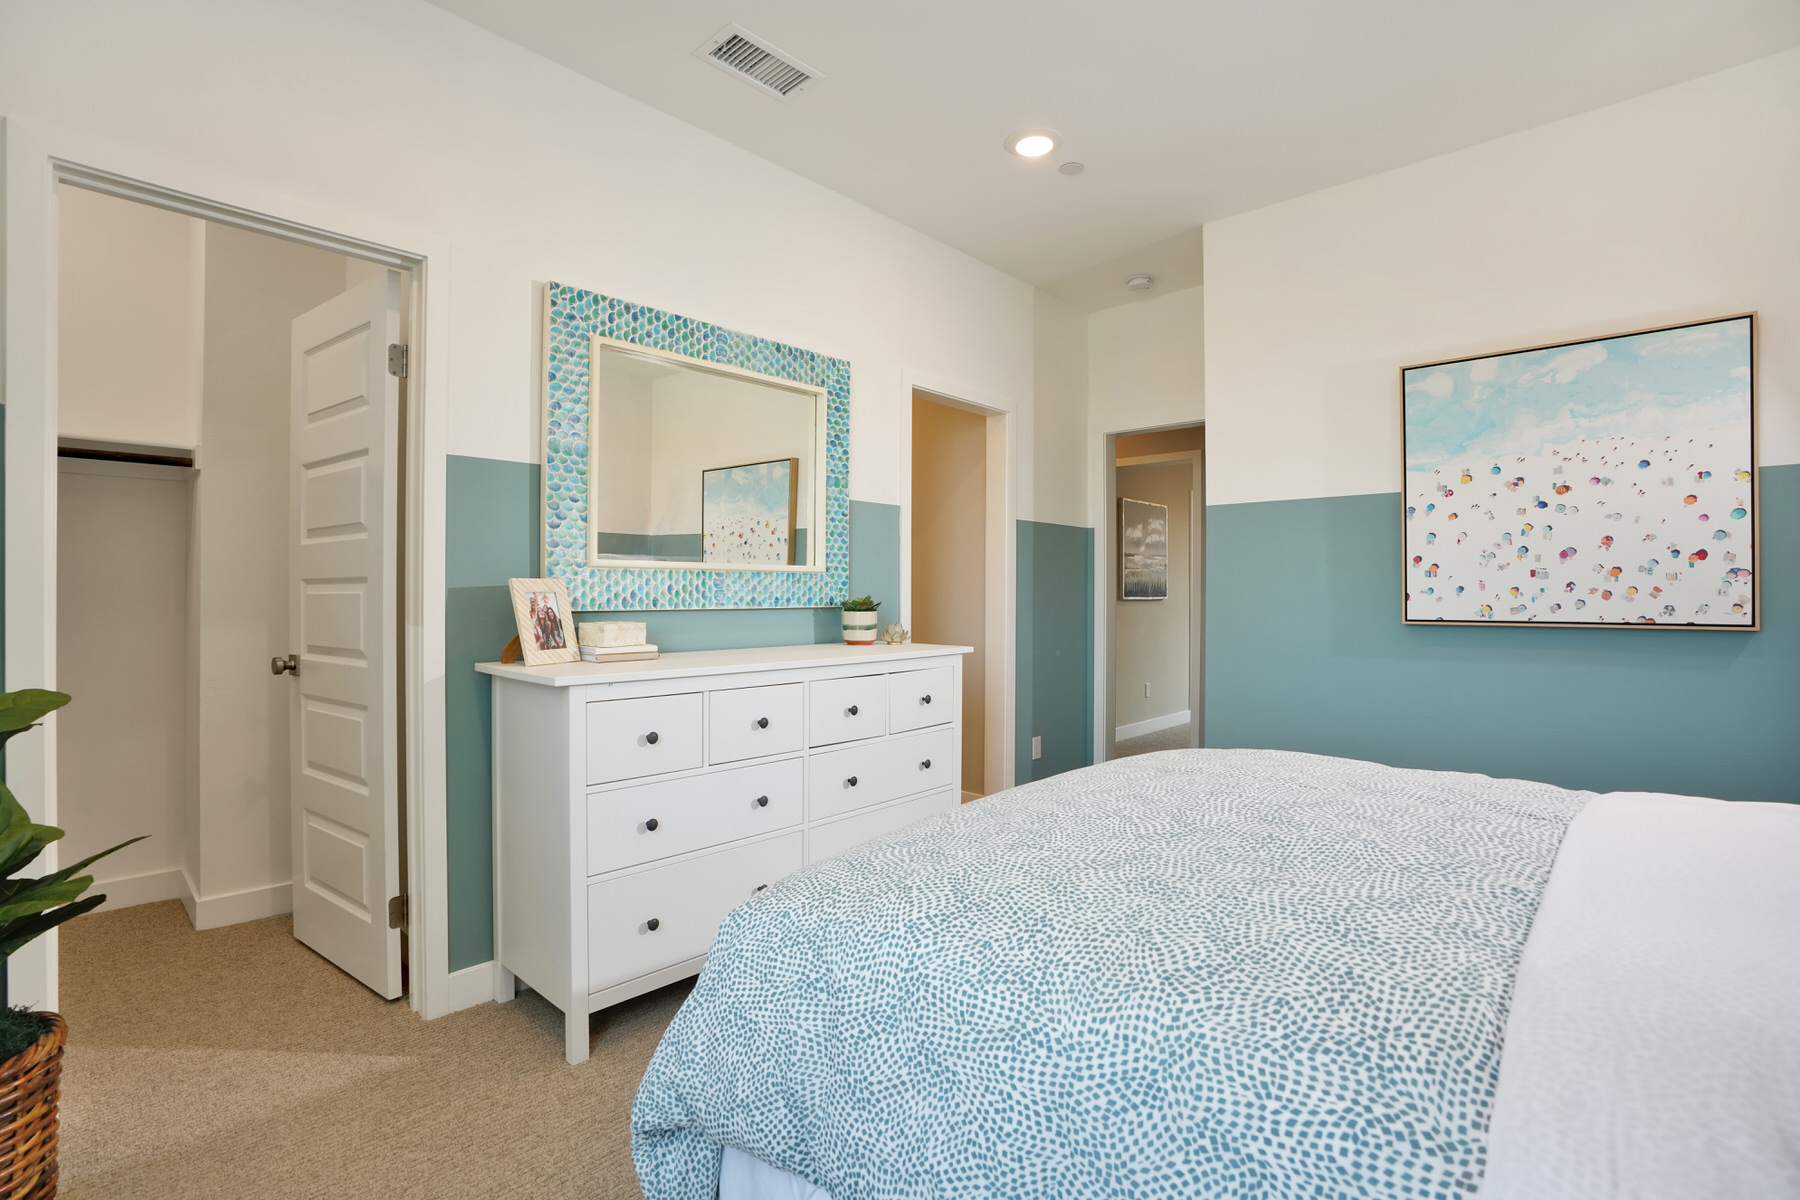 Bedroom 2 in Plan 2 at Townes at Magnolia by Melia Homes in Anaheim, CA